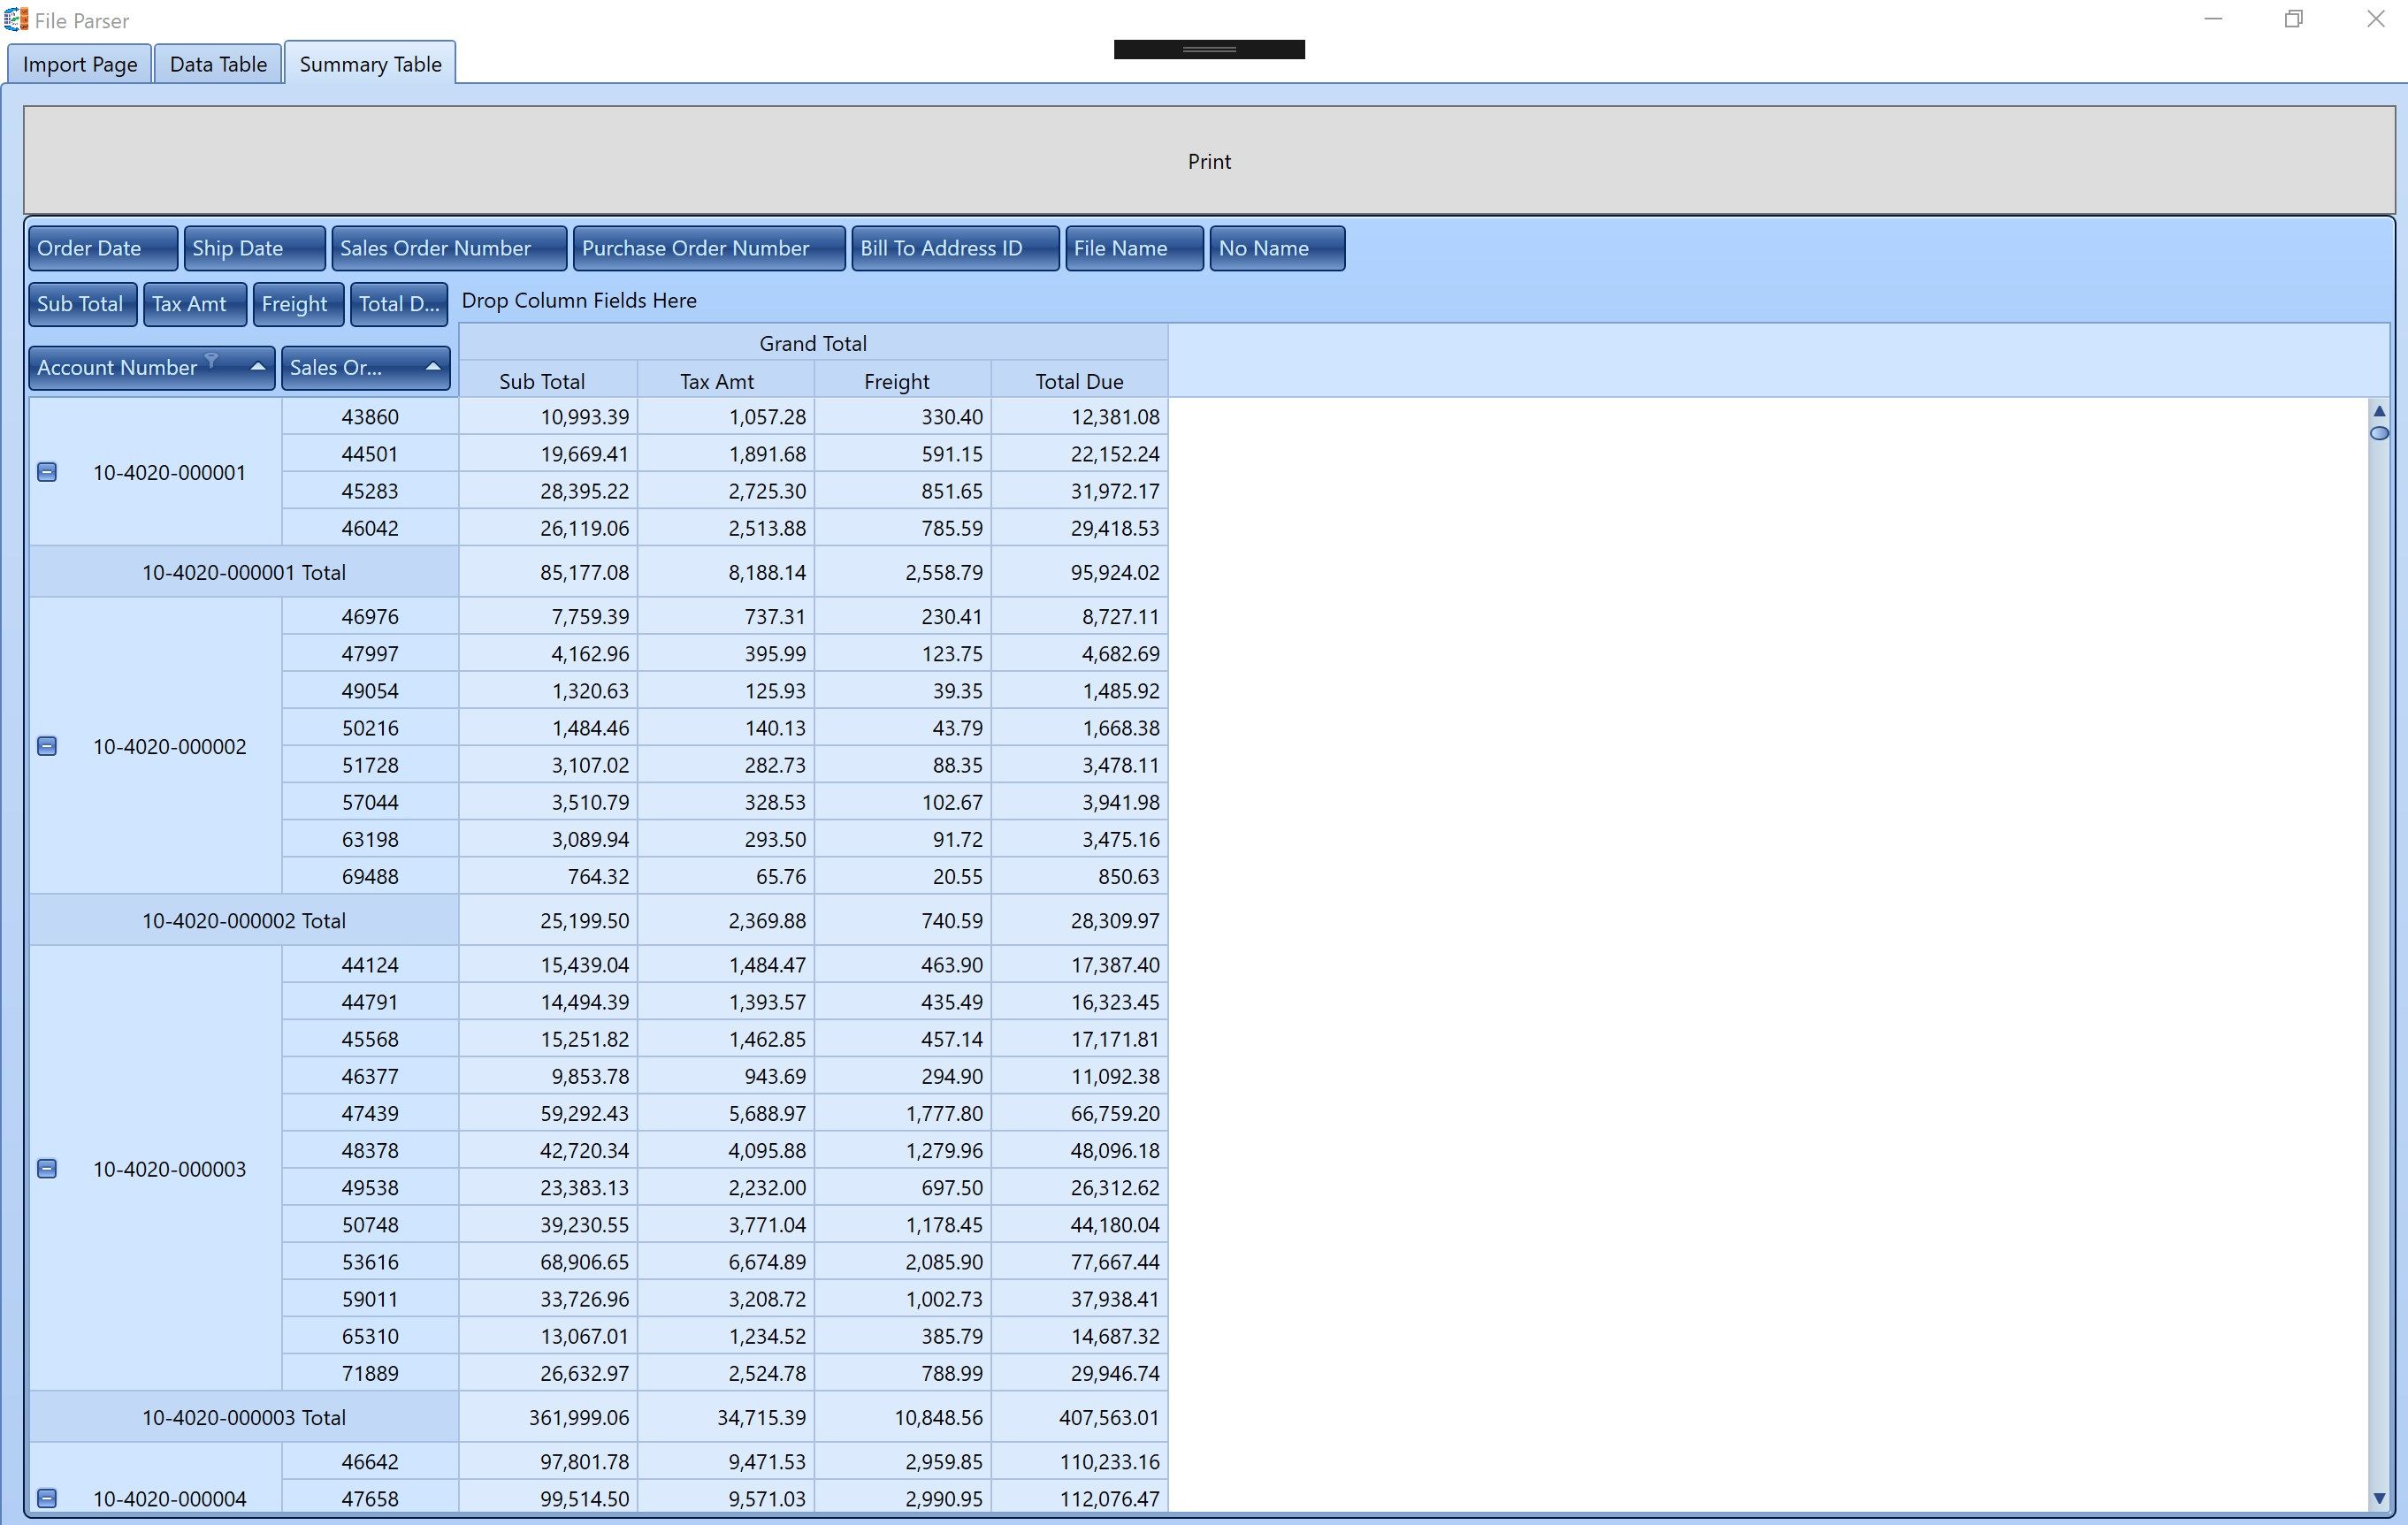 The pivot grid populates with the column headings. Drag and drop the columns to create summary reports.